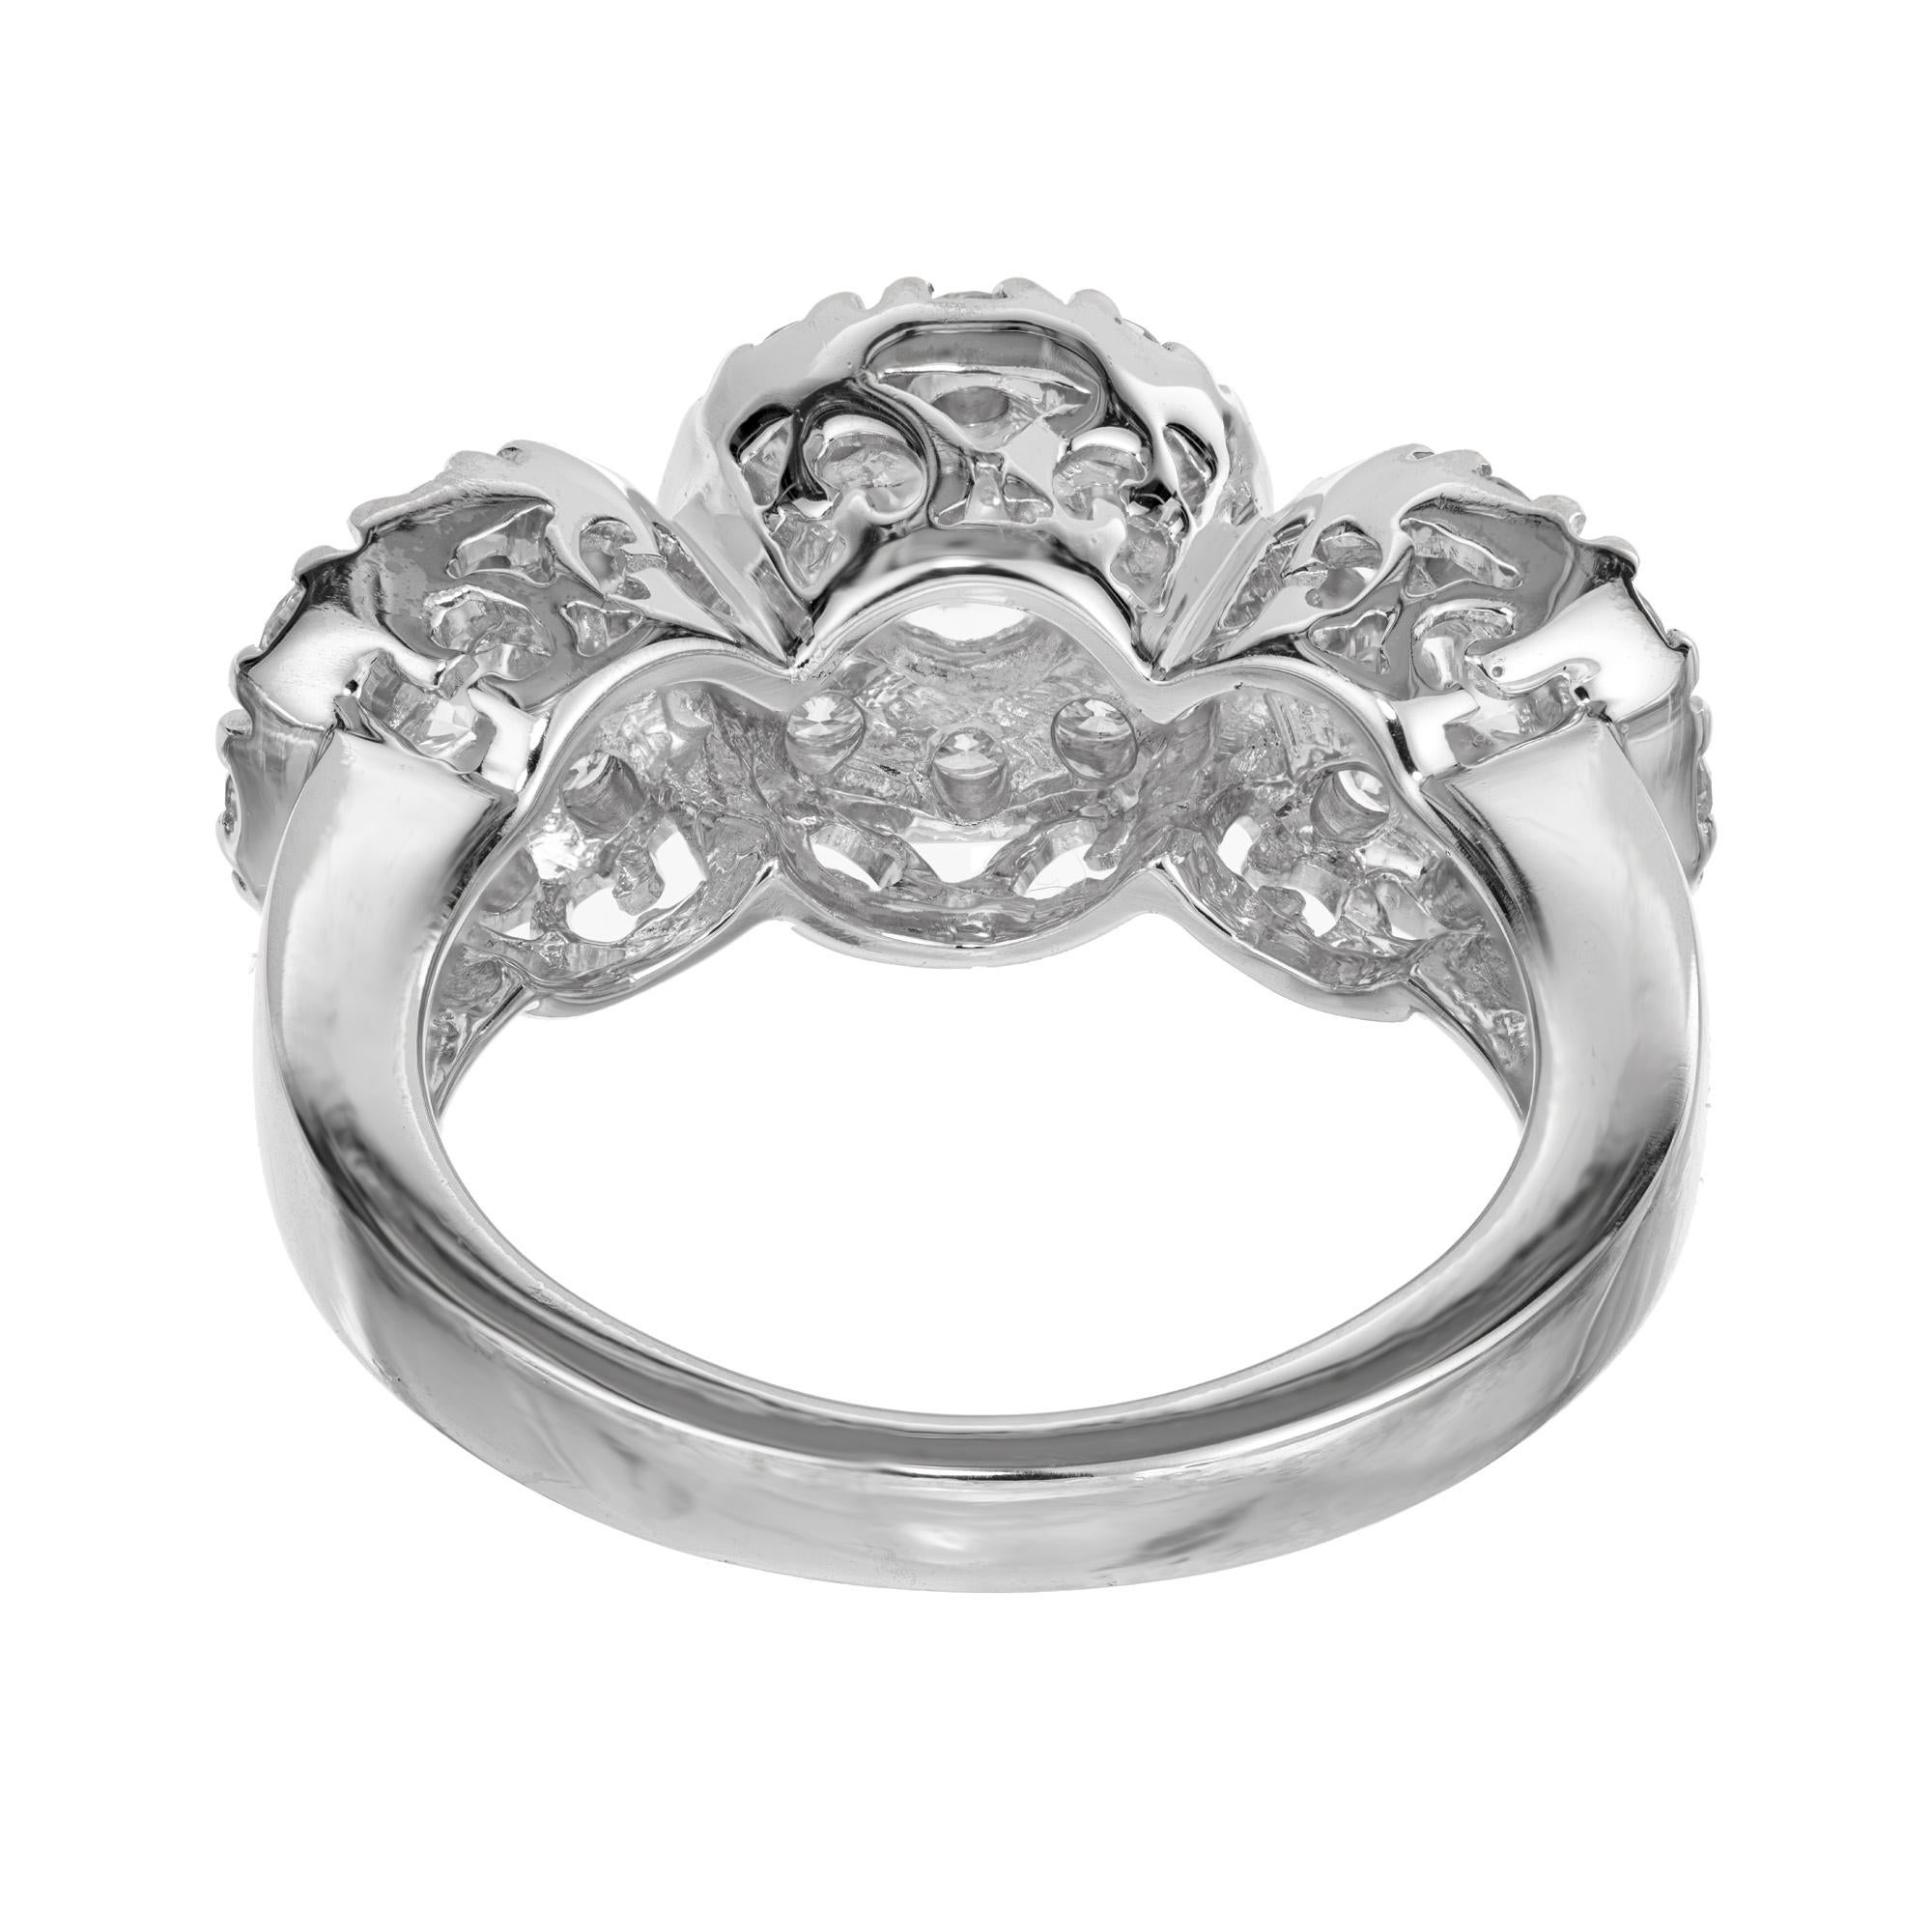 3 stone cluster engagement ring